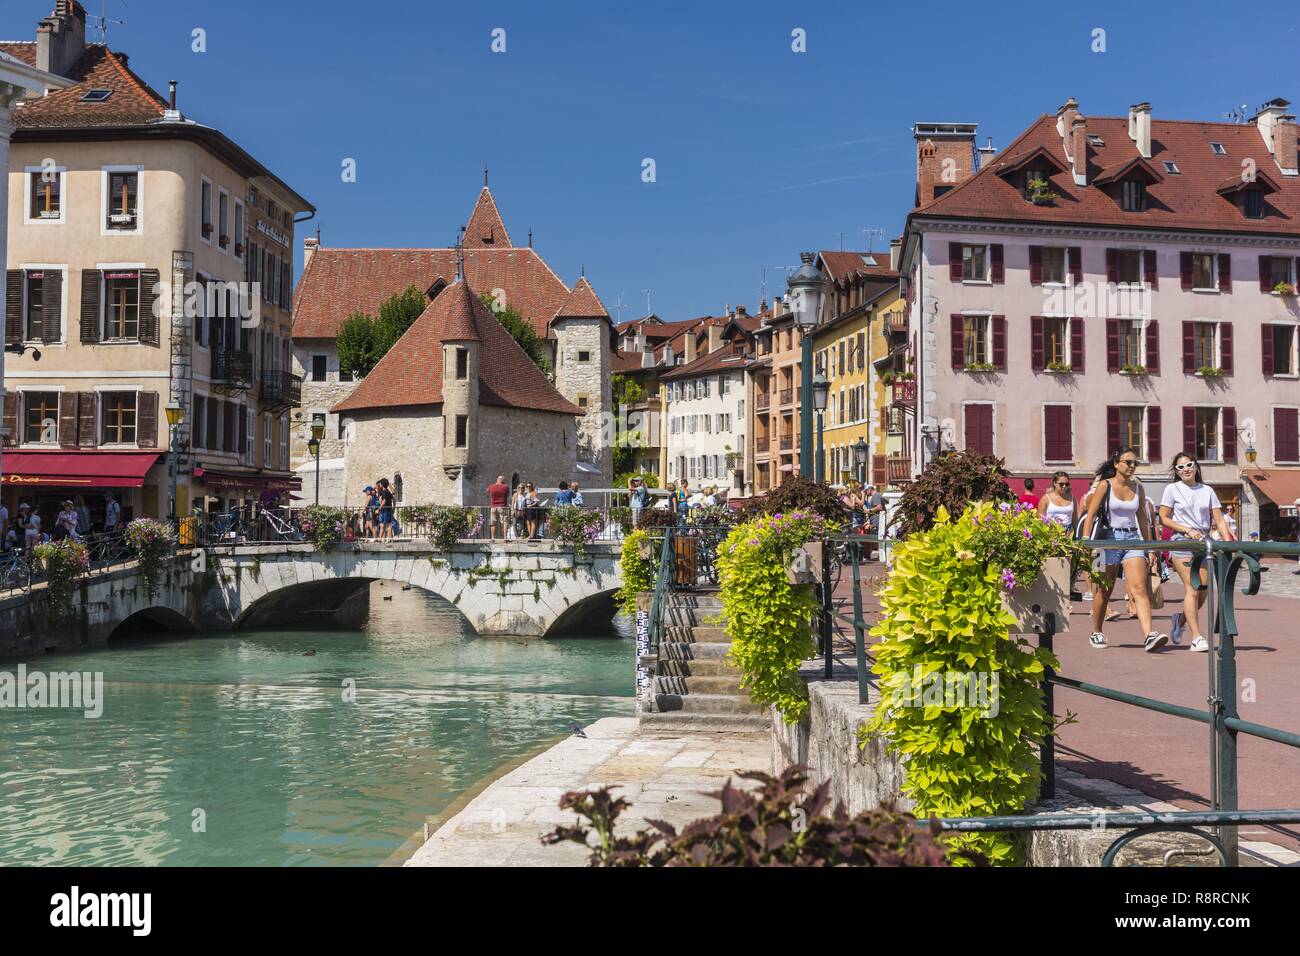 France, Haute Savoie, Annecy, the old town, Quai Perriere on Thiou river banks and former jails of Palais de l'Isle Stock Photo